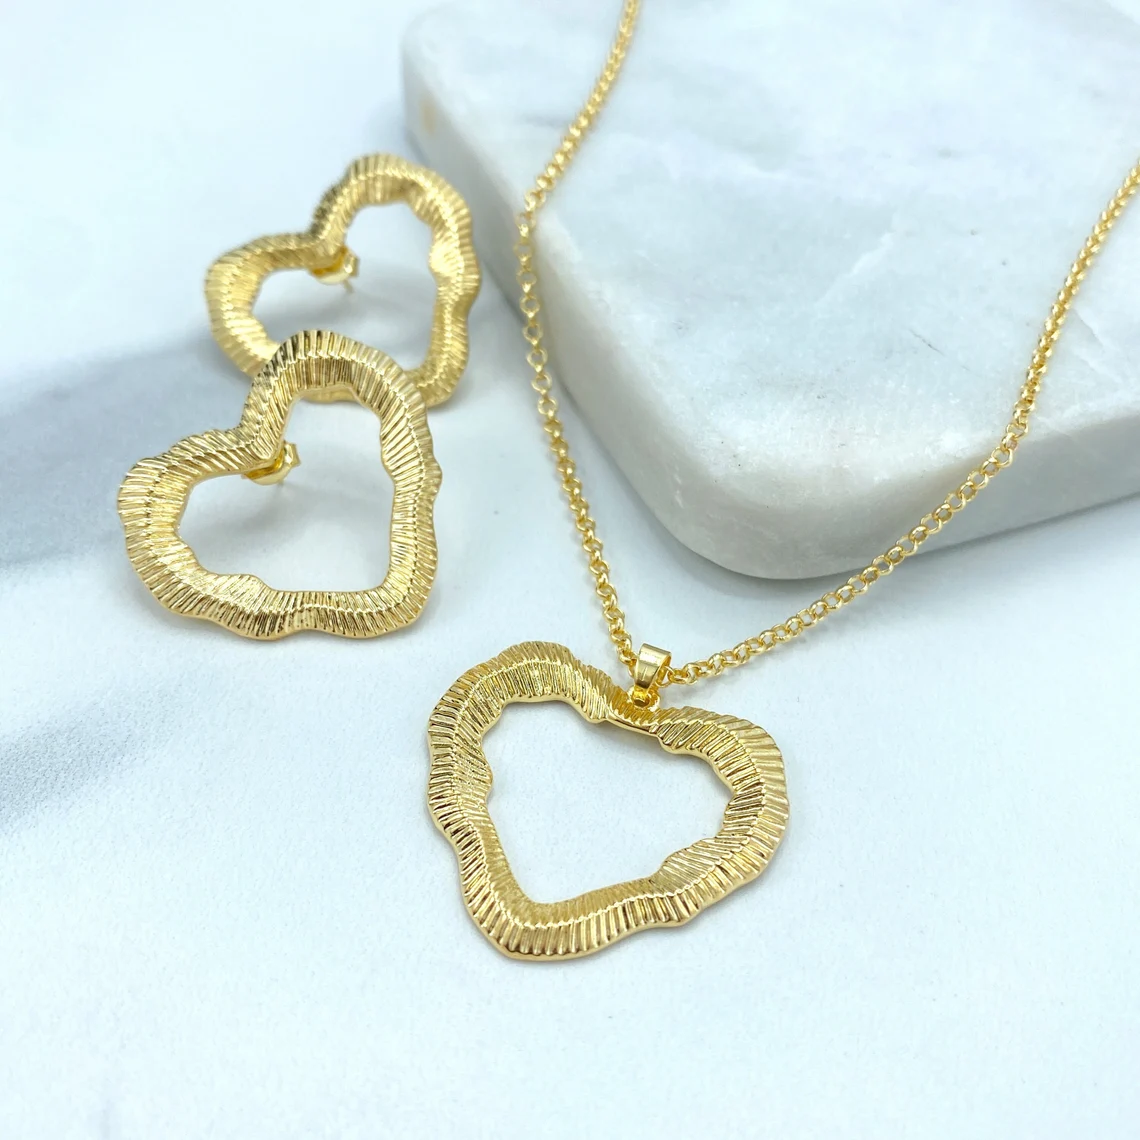 Irregular Hearts Necklace and Stud Earrings Romantic Jewelry Set 